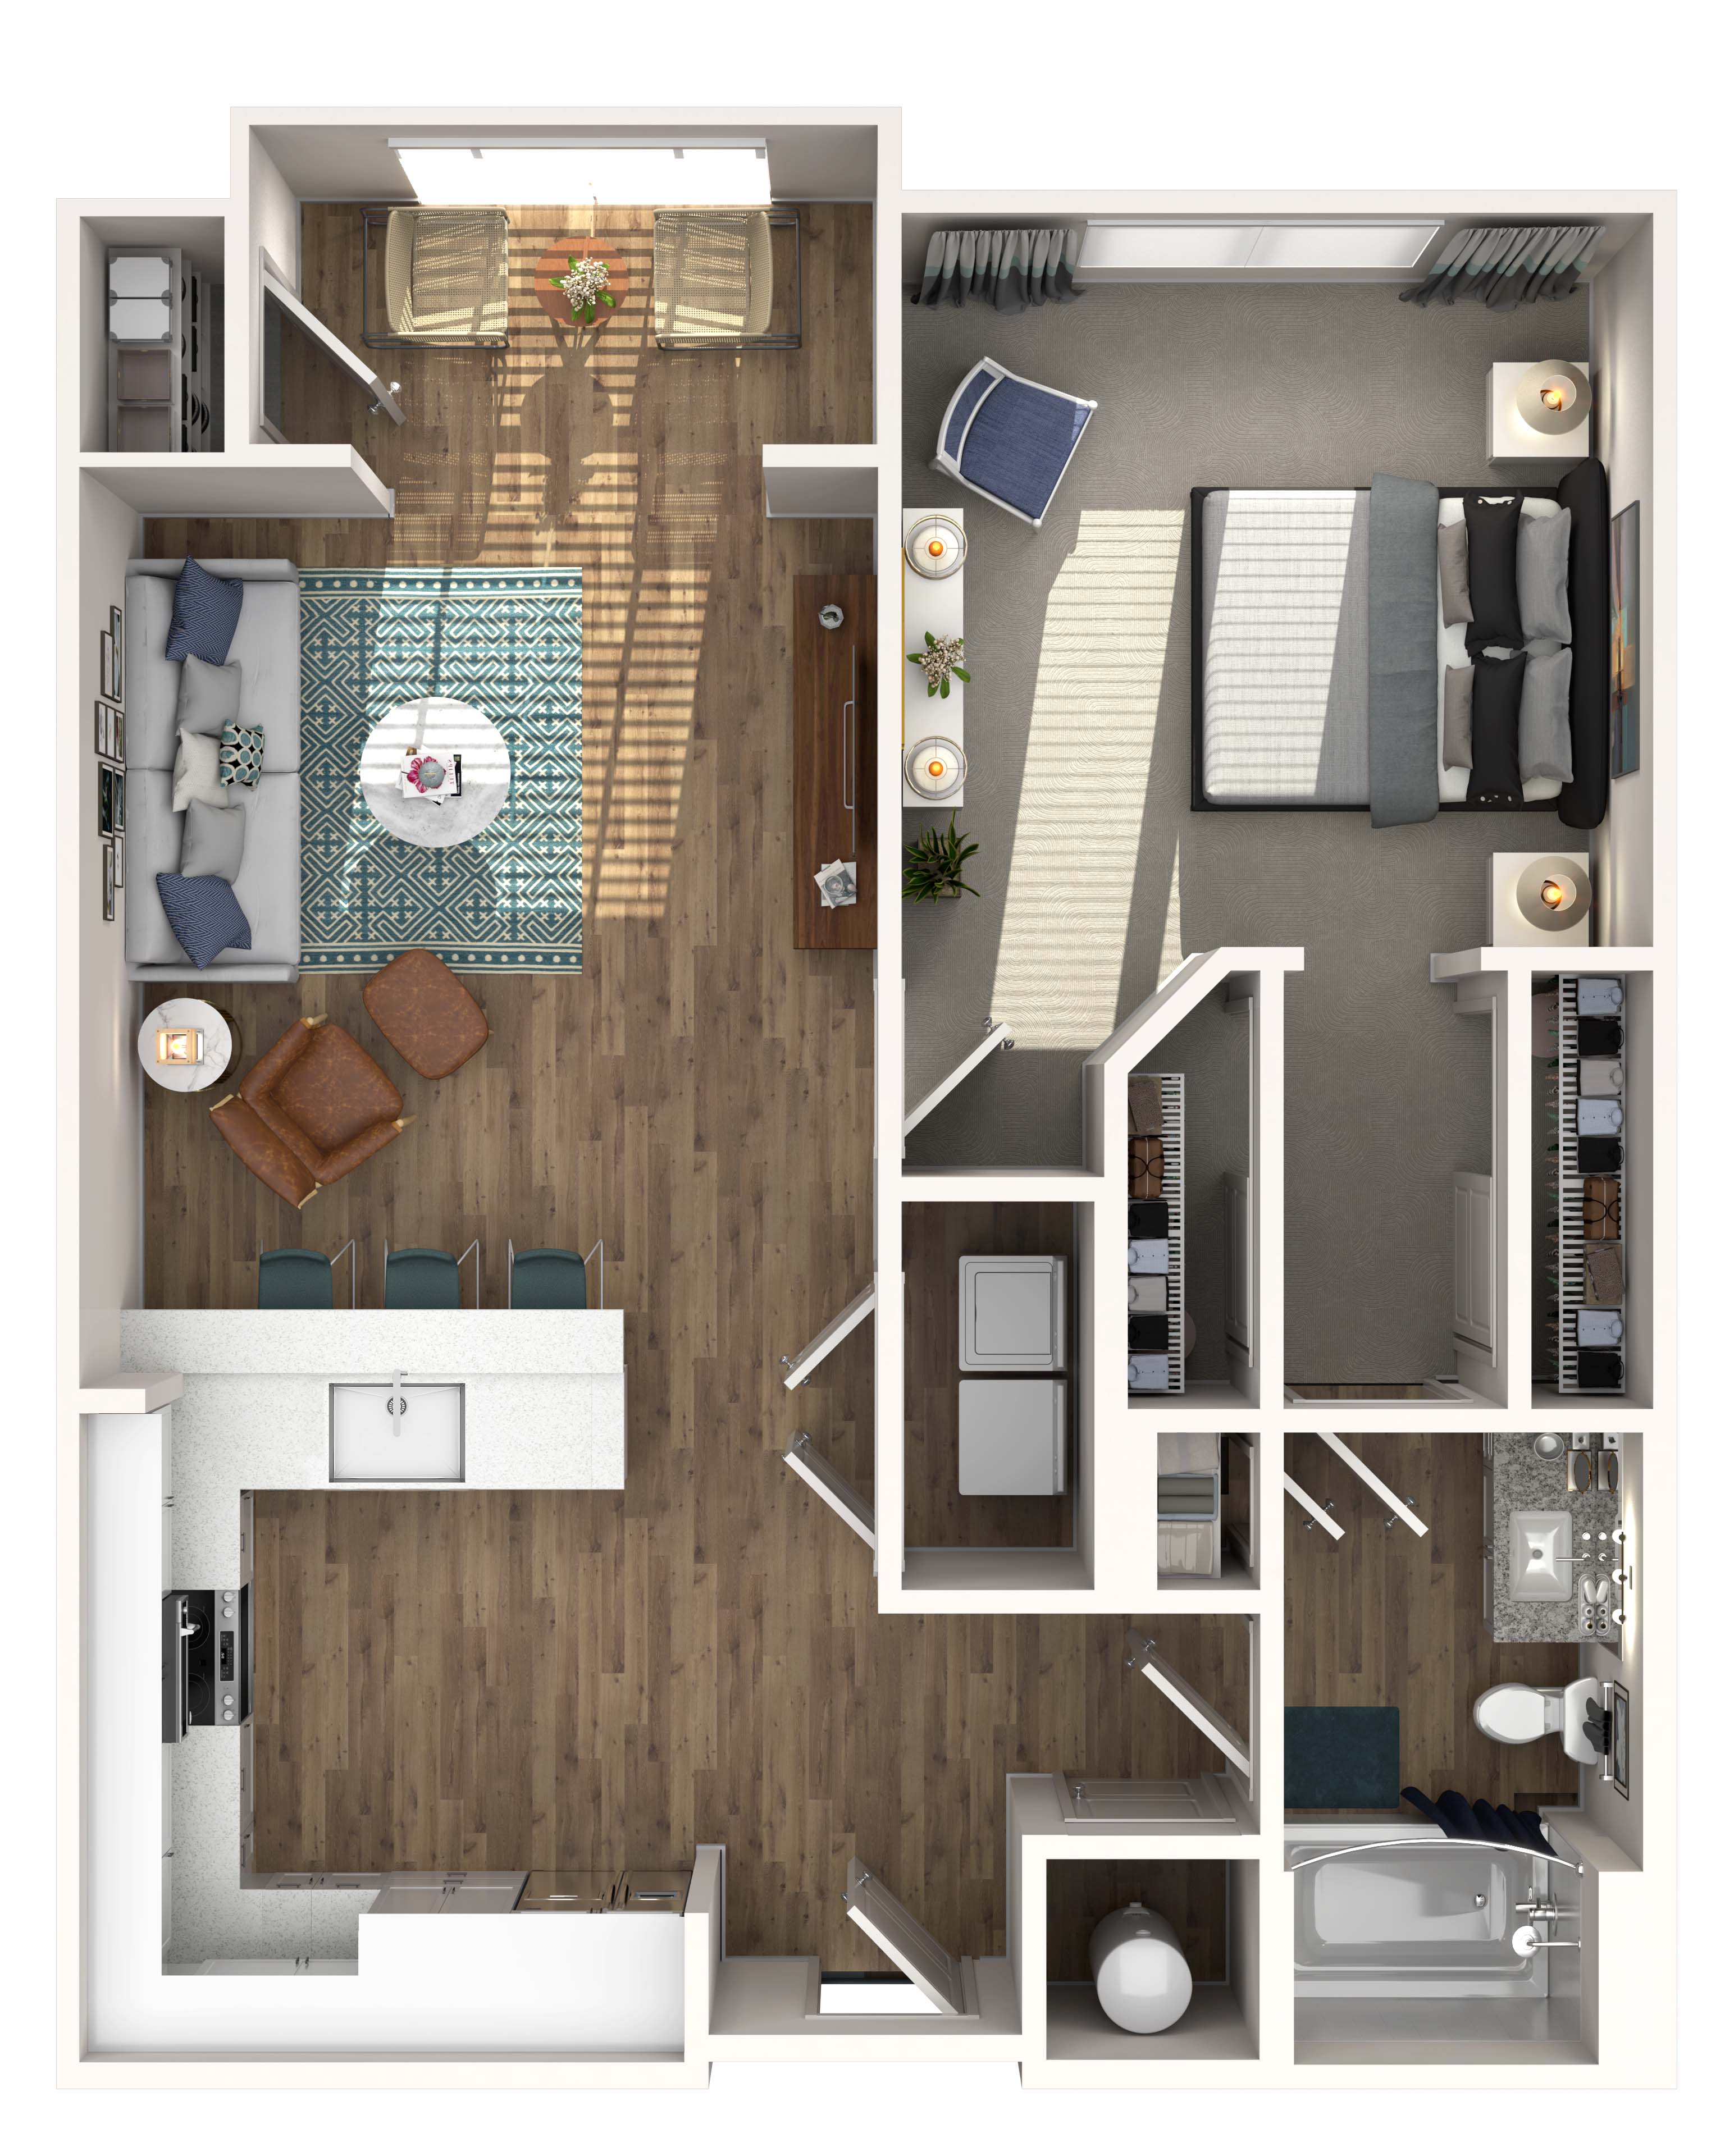 The Heights at Exchange - Apartment 1407